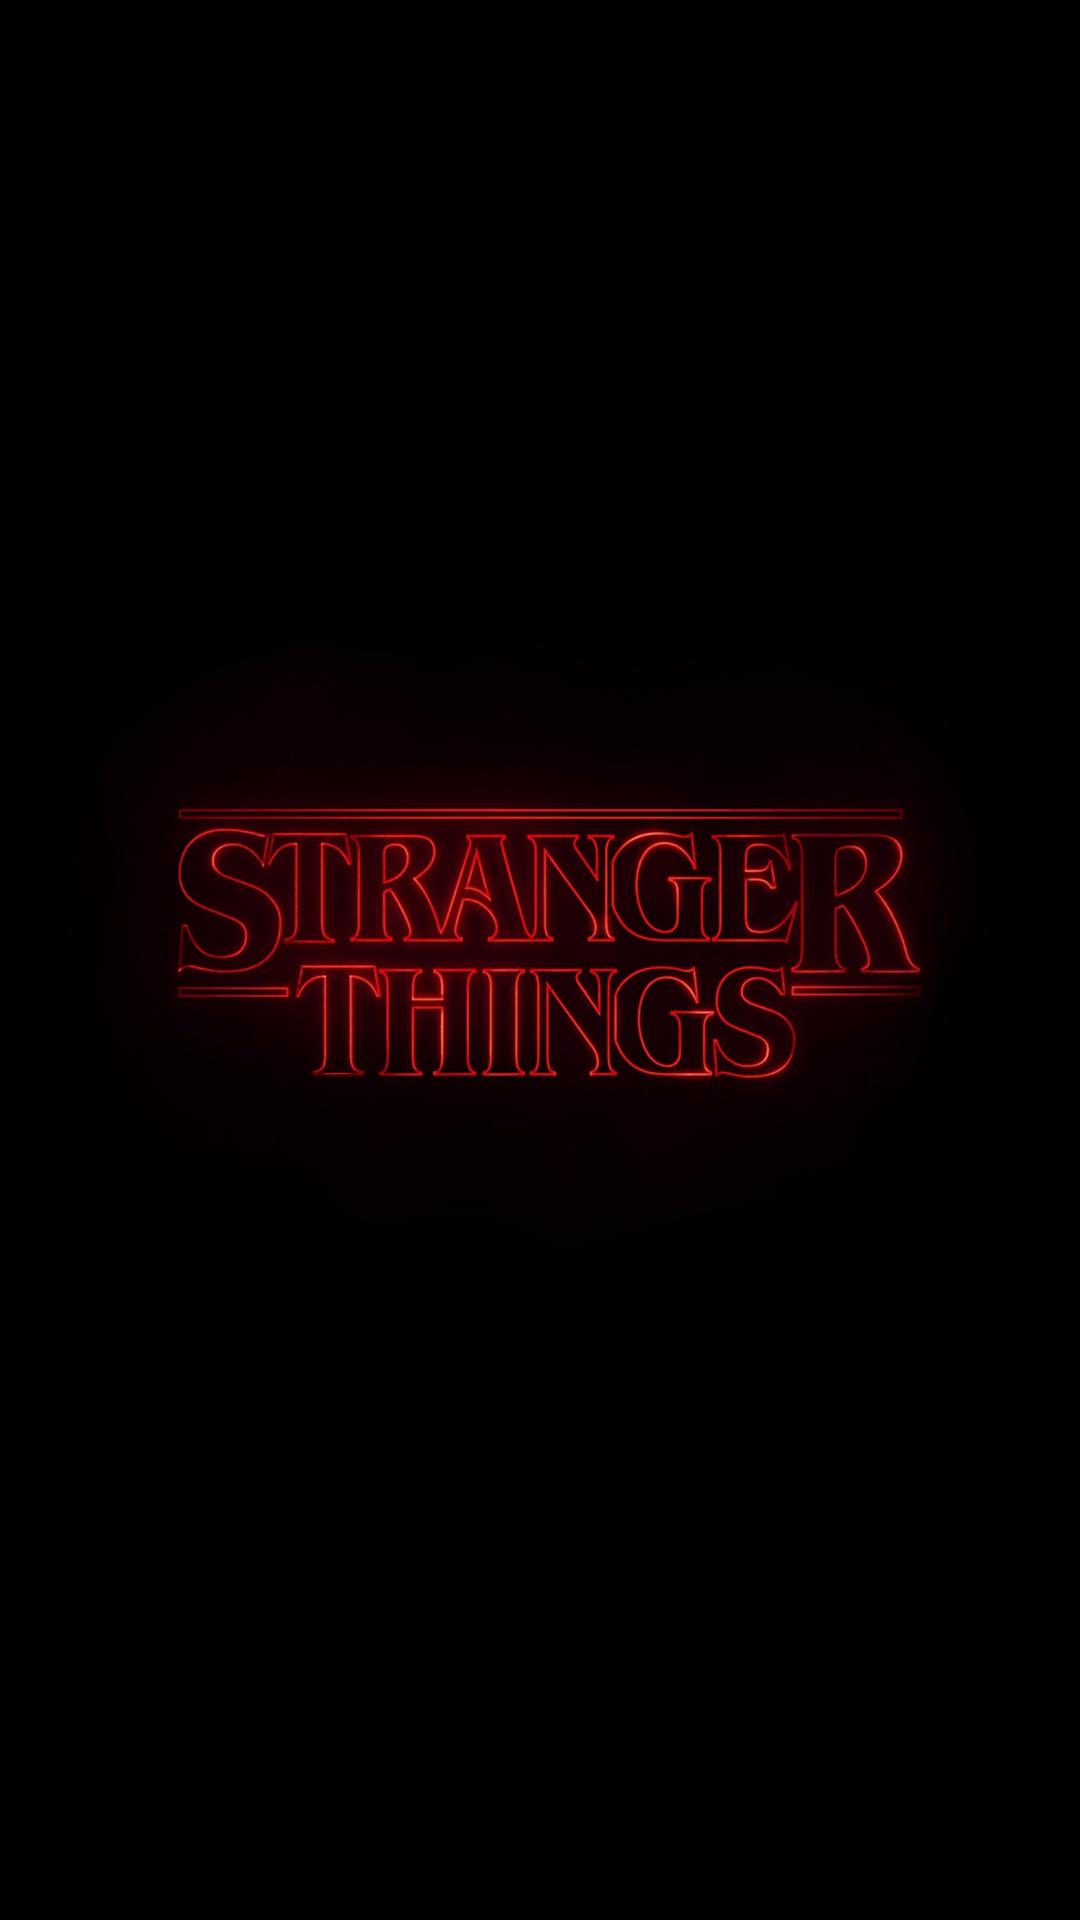 Stranger Things HD Wallpaper for iPhone 7